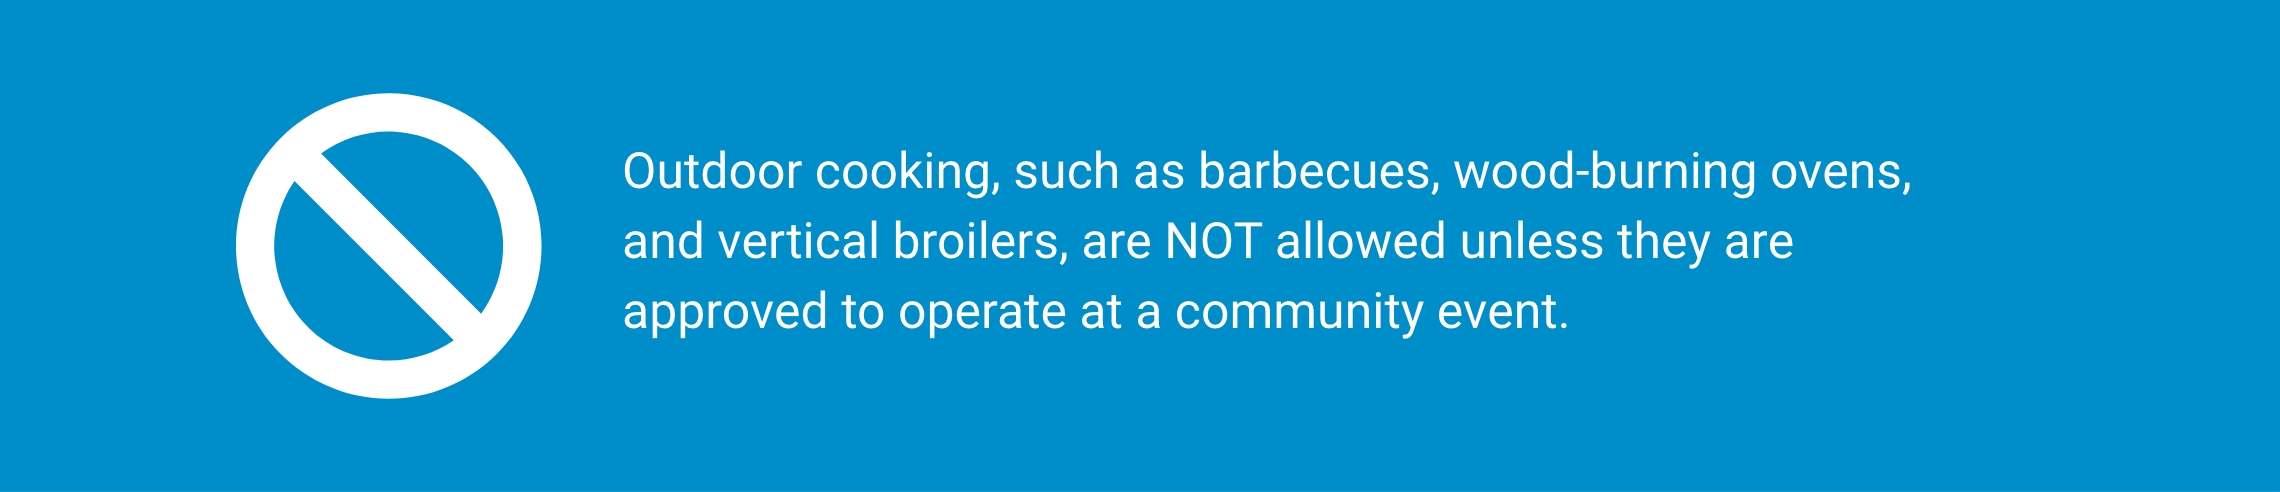 Outdoor cooking, such as barbecues, wood-burning ovens, and vertical broilers, are NOT allowed unless they are approved to operate at a community event.